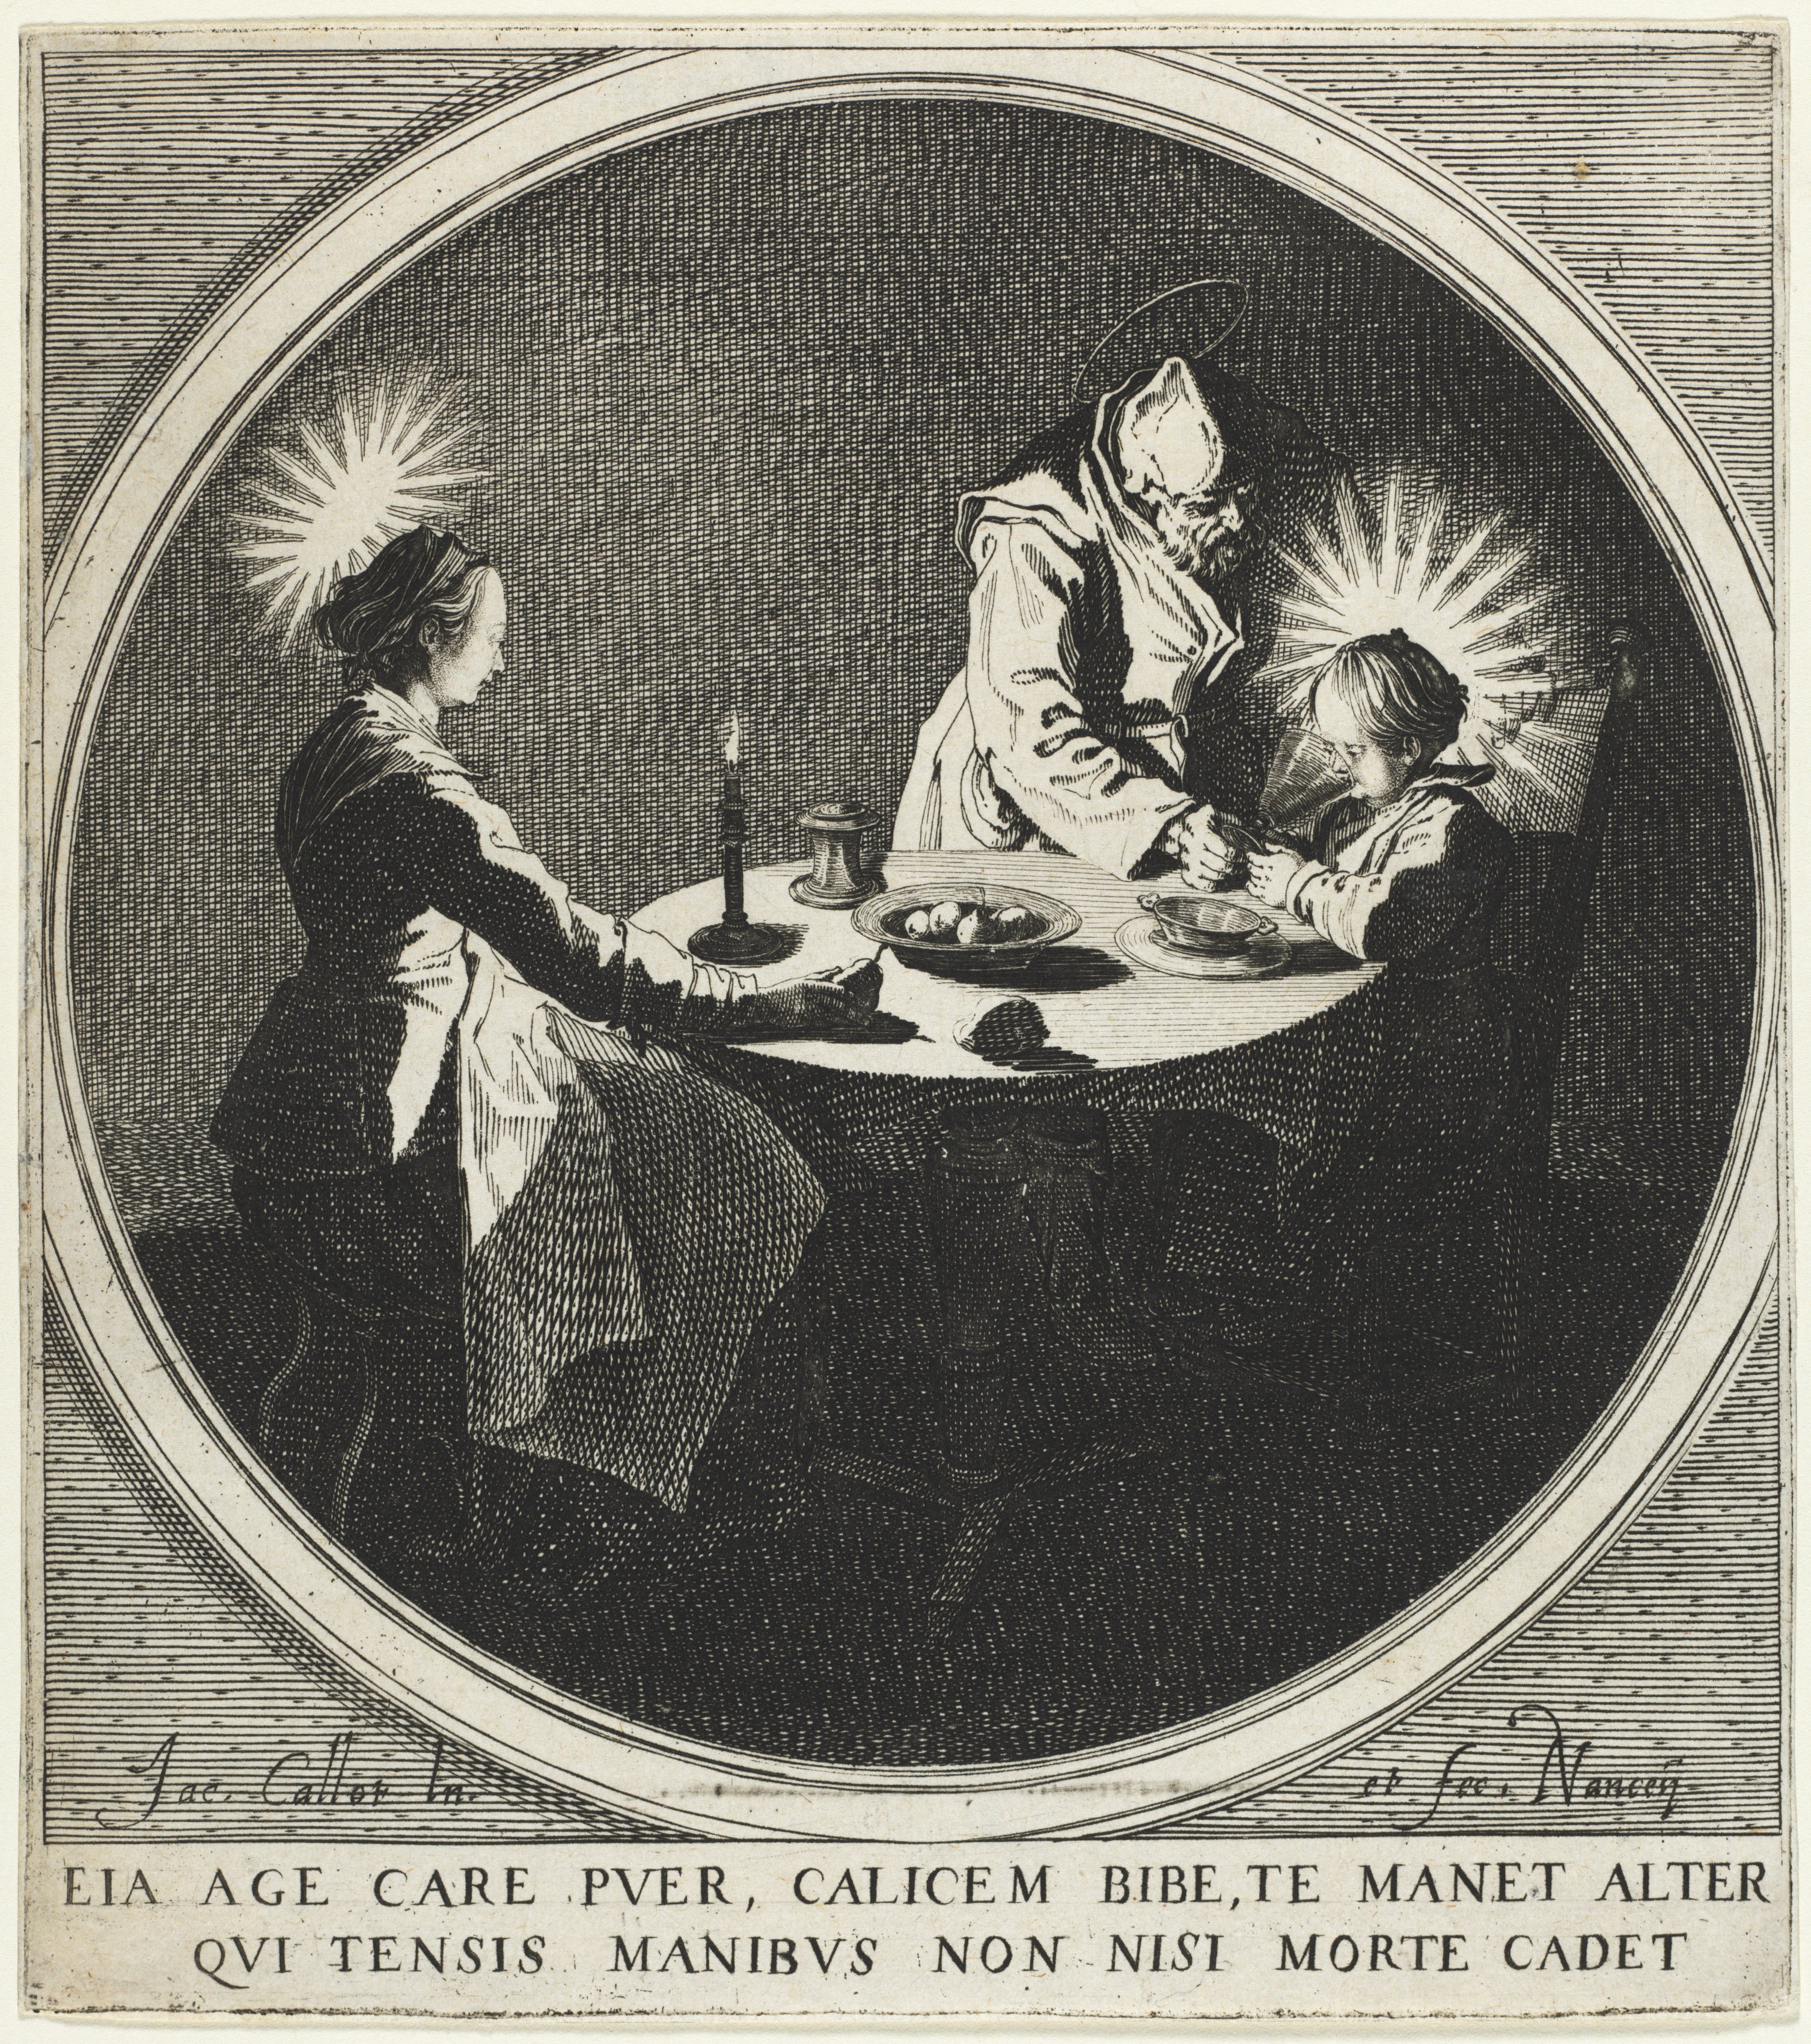 The Blessing (Le Bénédicité) also known as The Holy Family at Table